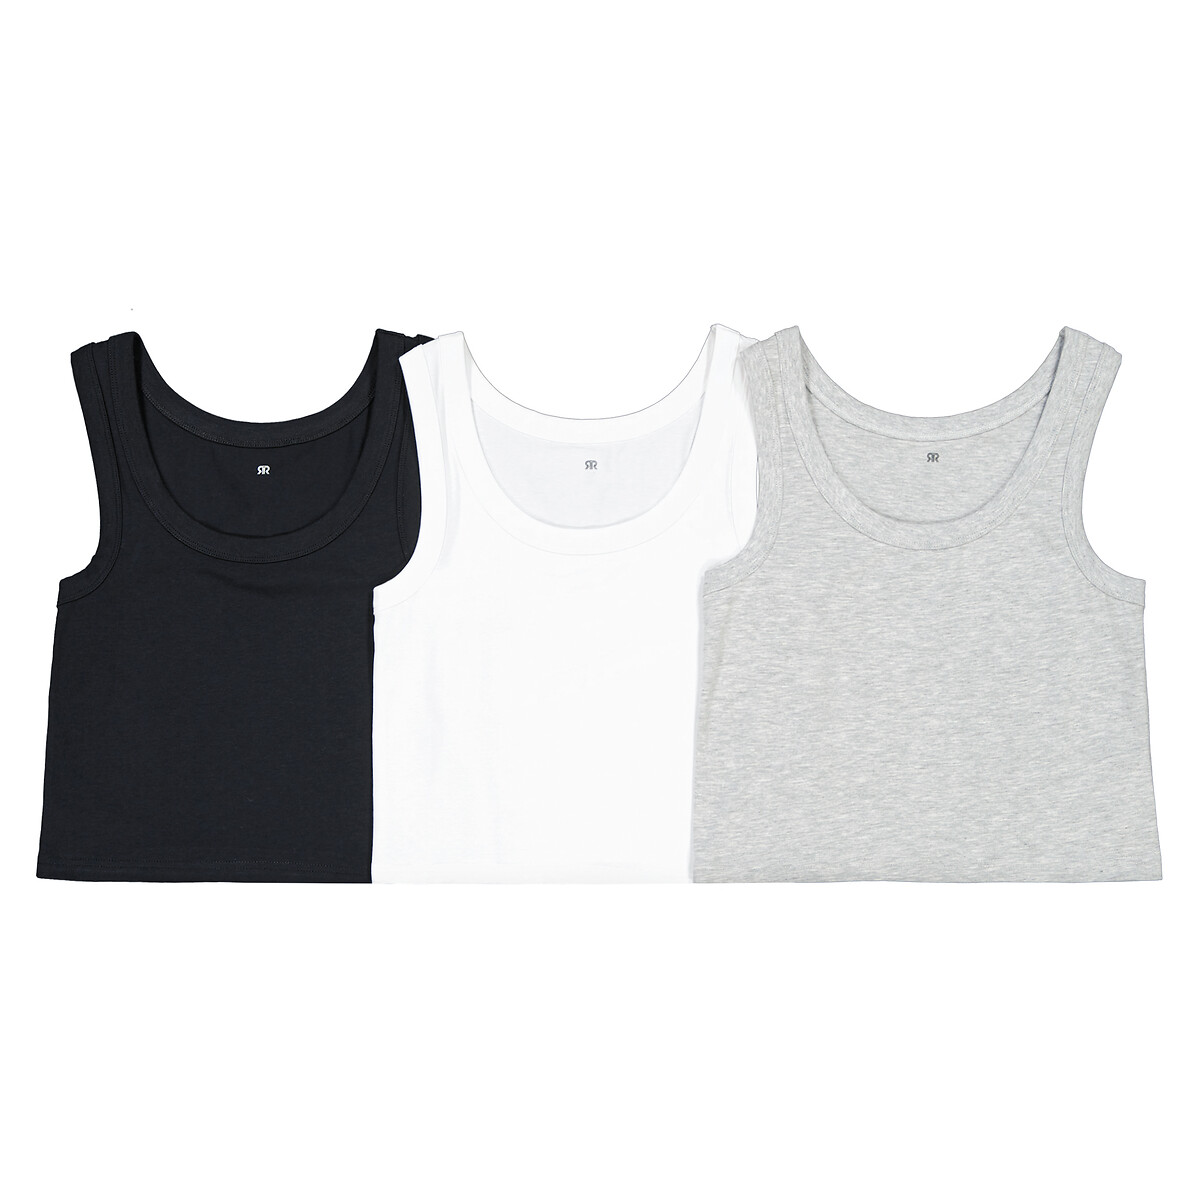 Pack of 3 Cropped Vest Tops in Plain Cotton